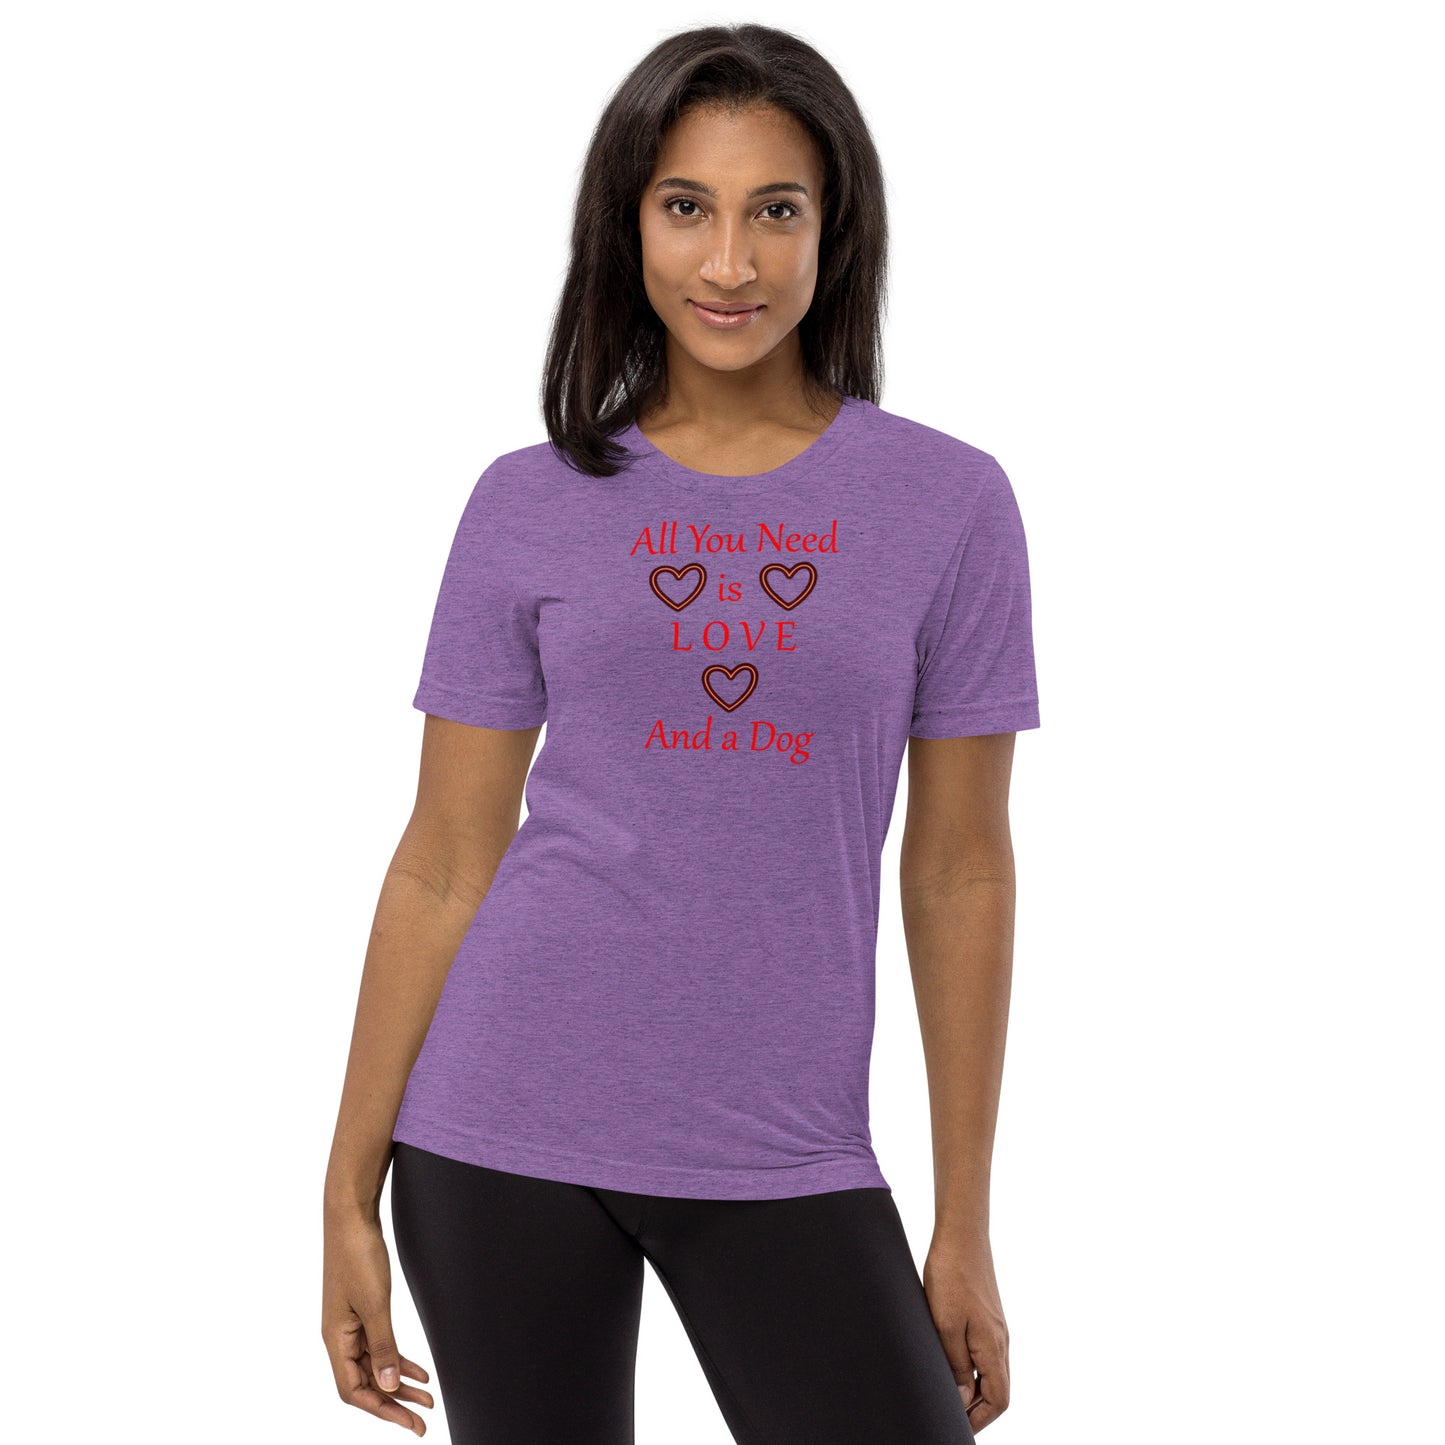 All You Need Is Love And A Dog Short sleeve t-shirt